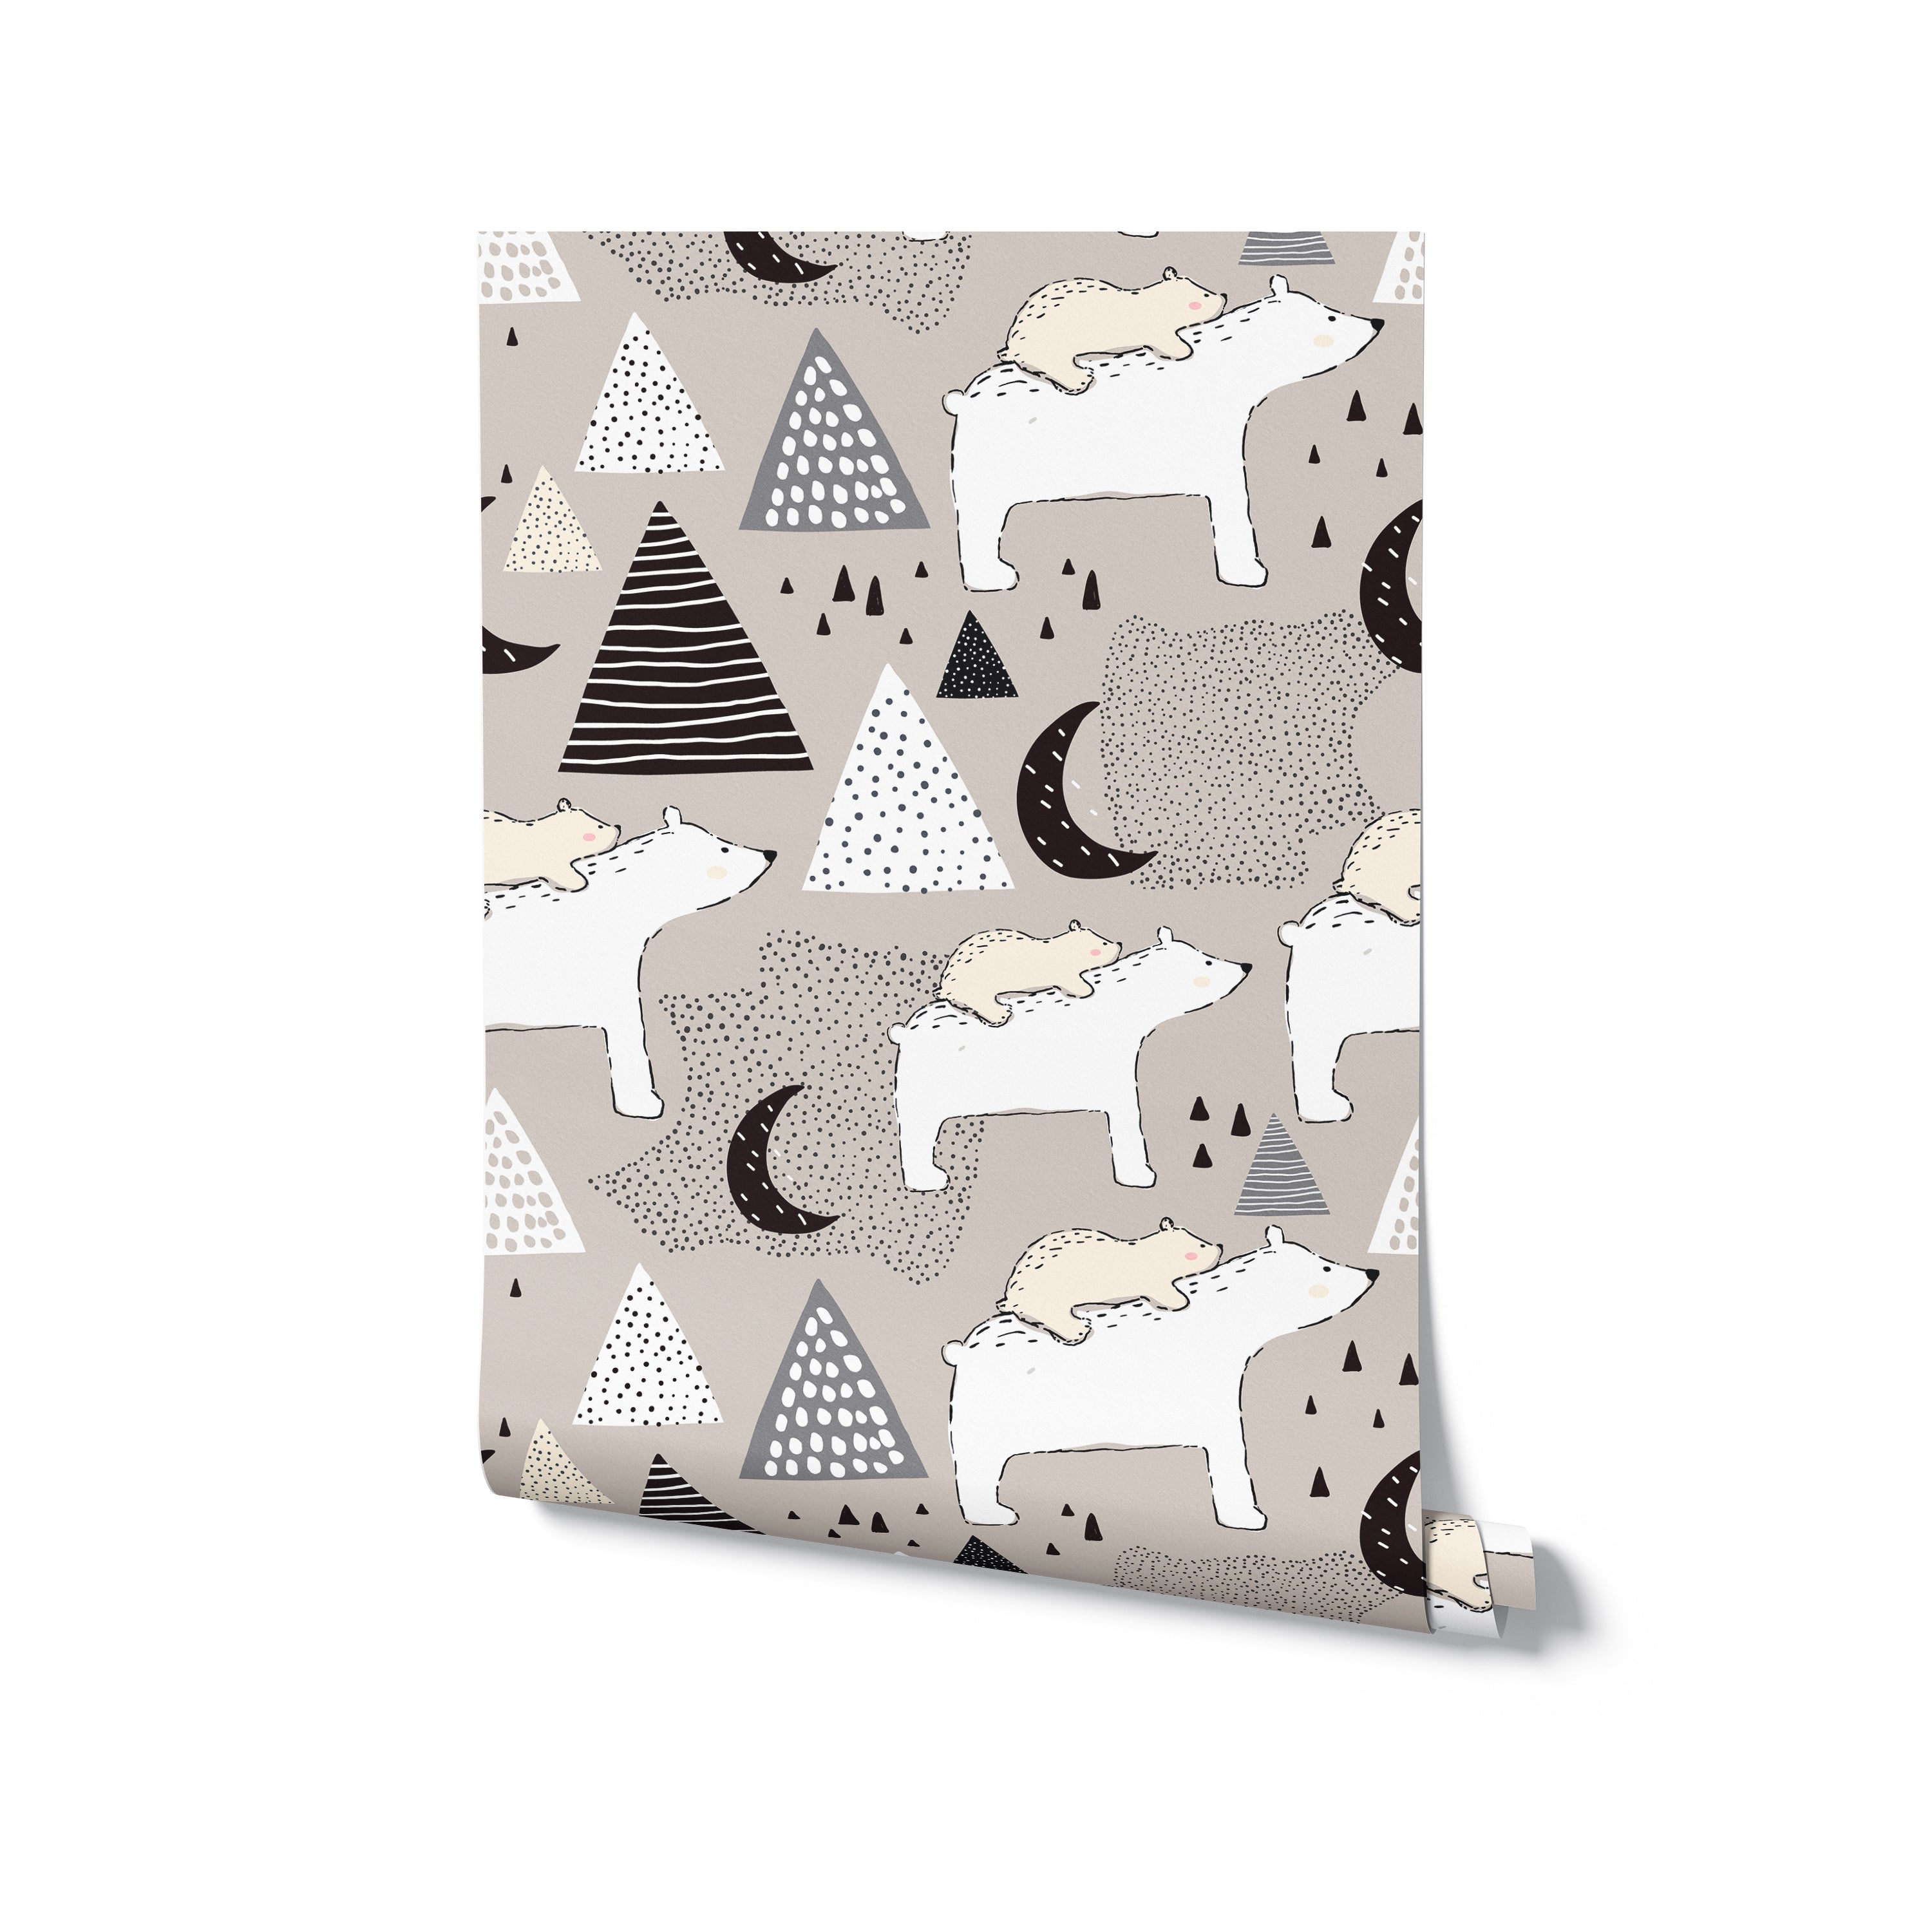 A roll of "Polar Bear Cubs Wallpaper - 25 inches" showing a continuous pattern of playful polar bear cubs interspersed with geometric shapes on a speckled beige background. The design is ideal for adding a charming and calming effect to any child's nursery or play area.